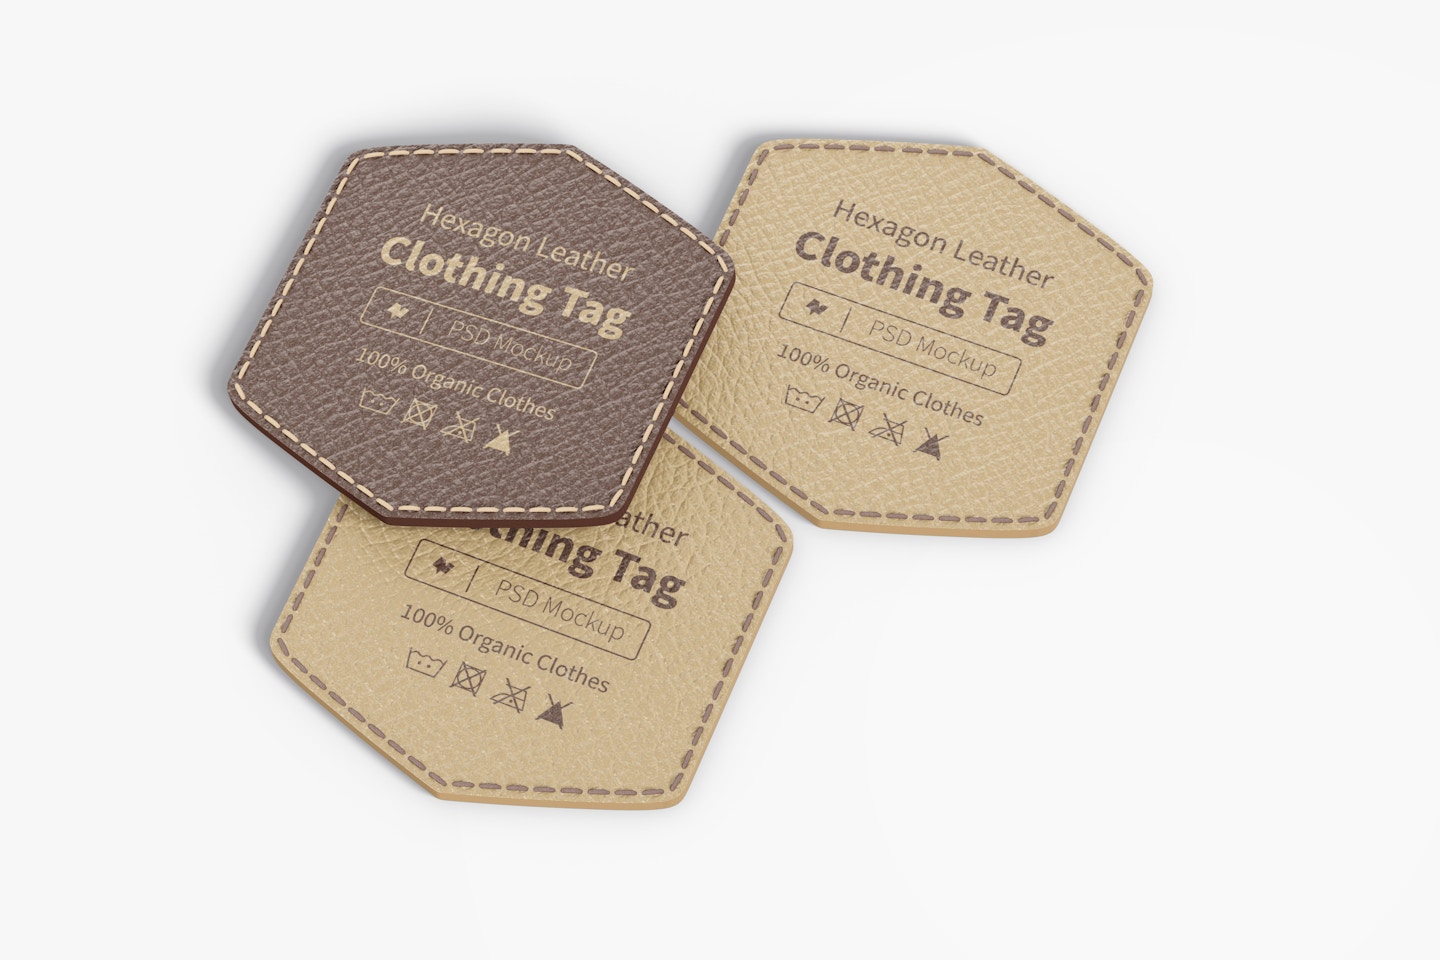 Hexagon Leather Clothing Tags Mockup, Top View